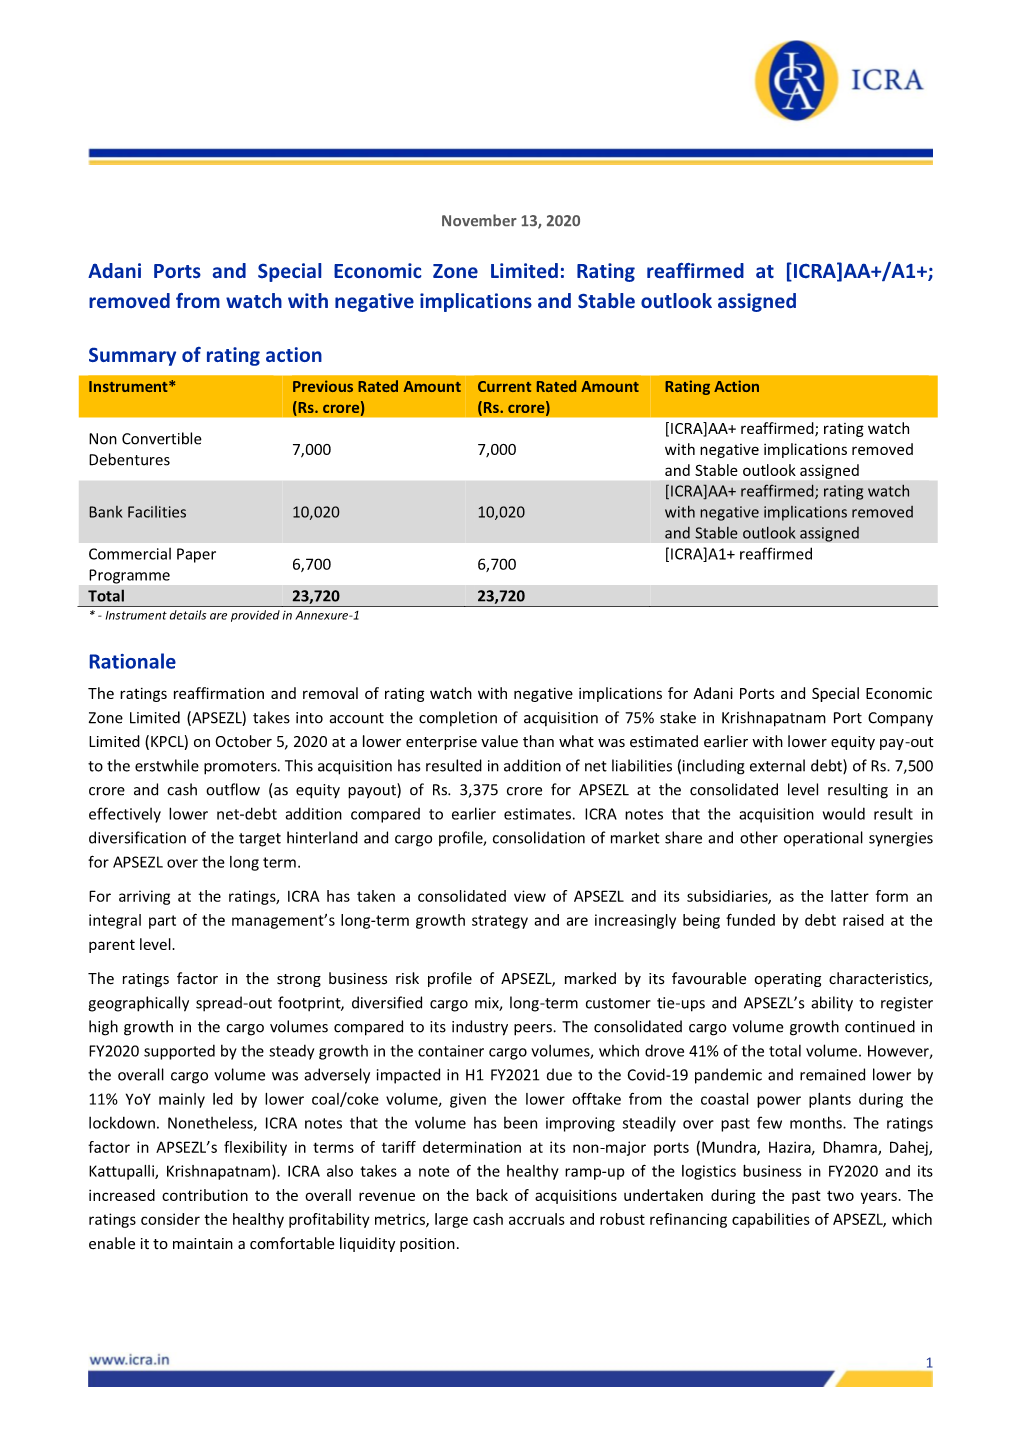 Adani Ports and Special Economic Zone Limited: Rating Reaffirmed at [ICRA]AA+/A1+; Removed from Watch with Negative Implications and Stable Outlook Assigned